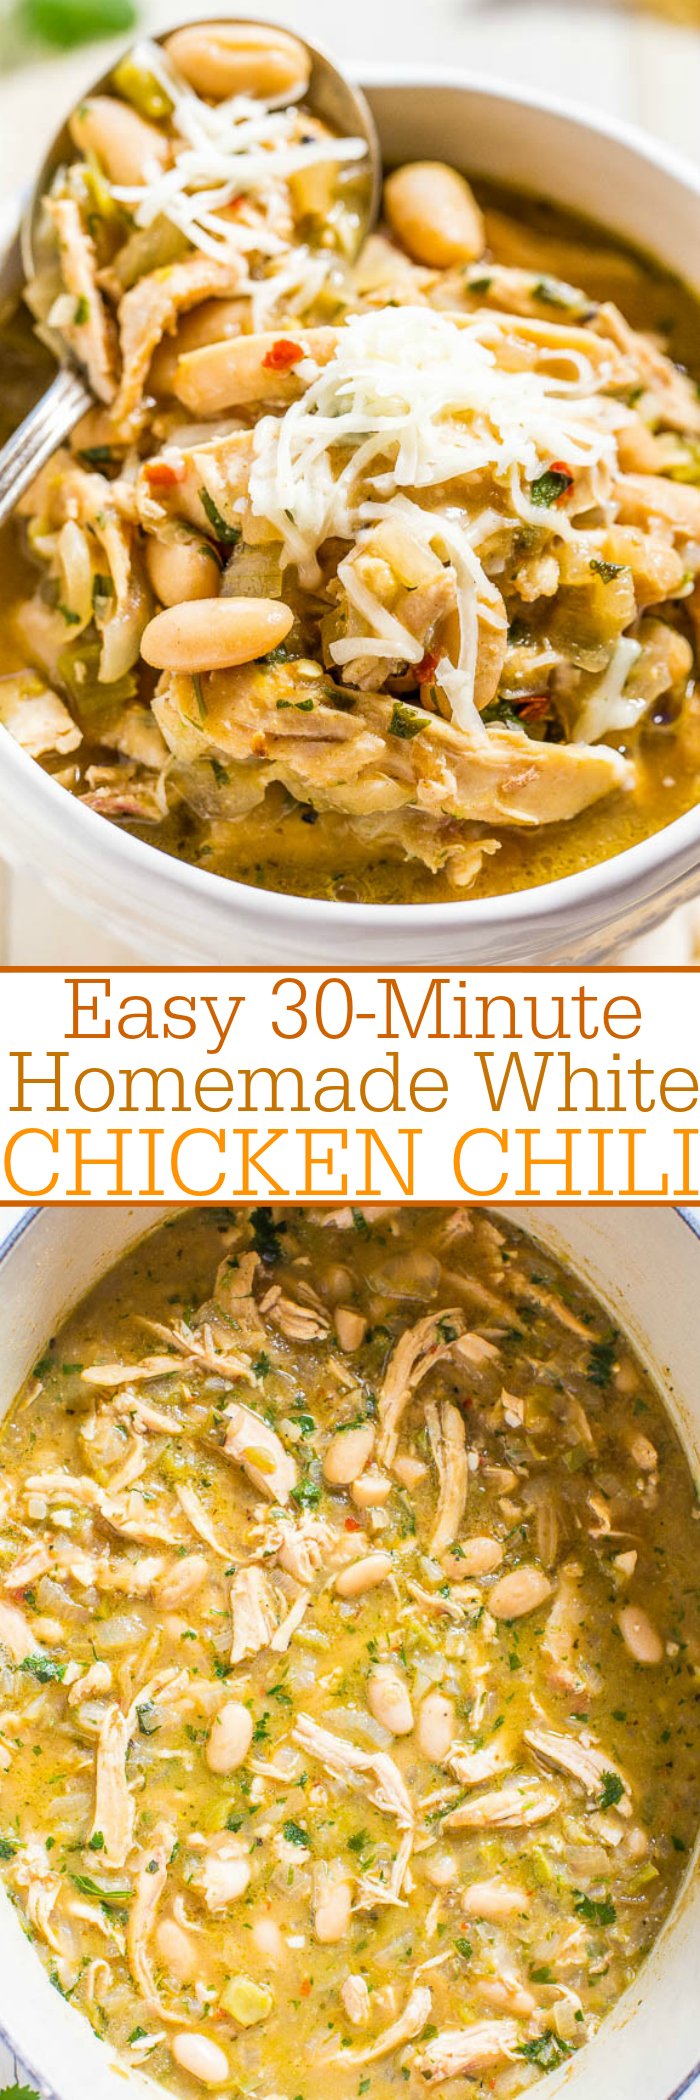 Easy 30-Minute Homemade White Chicken Chili - Hearty, healthy, loaded with tender chicken, and packed with bold flavor!! Fast and easy comfort food that everyone loves!! It'll be on rotation all winter!